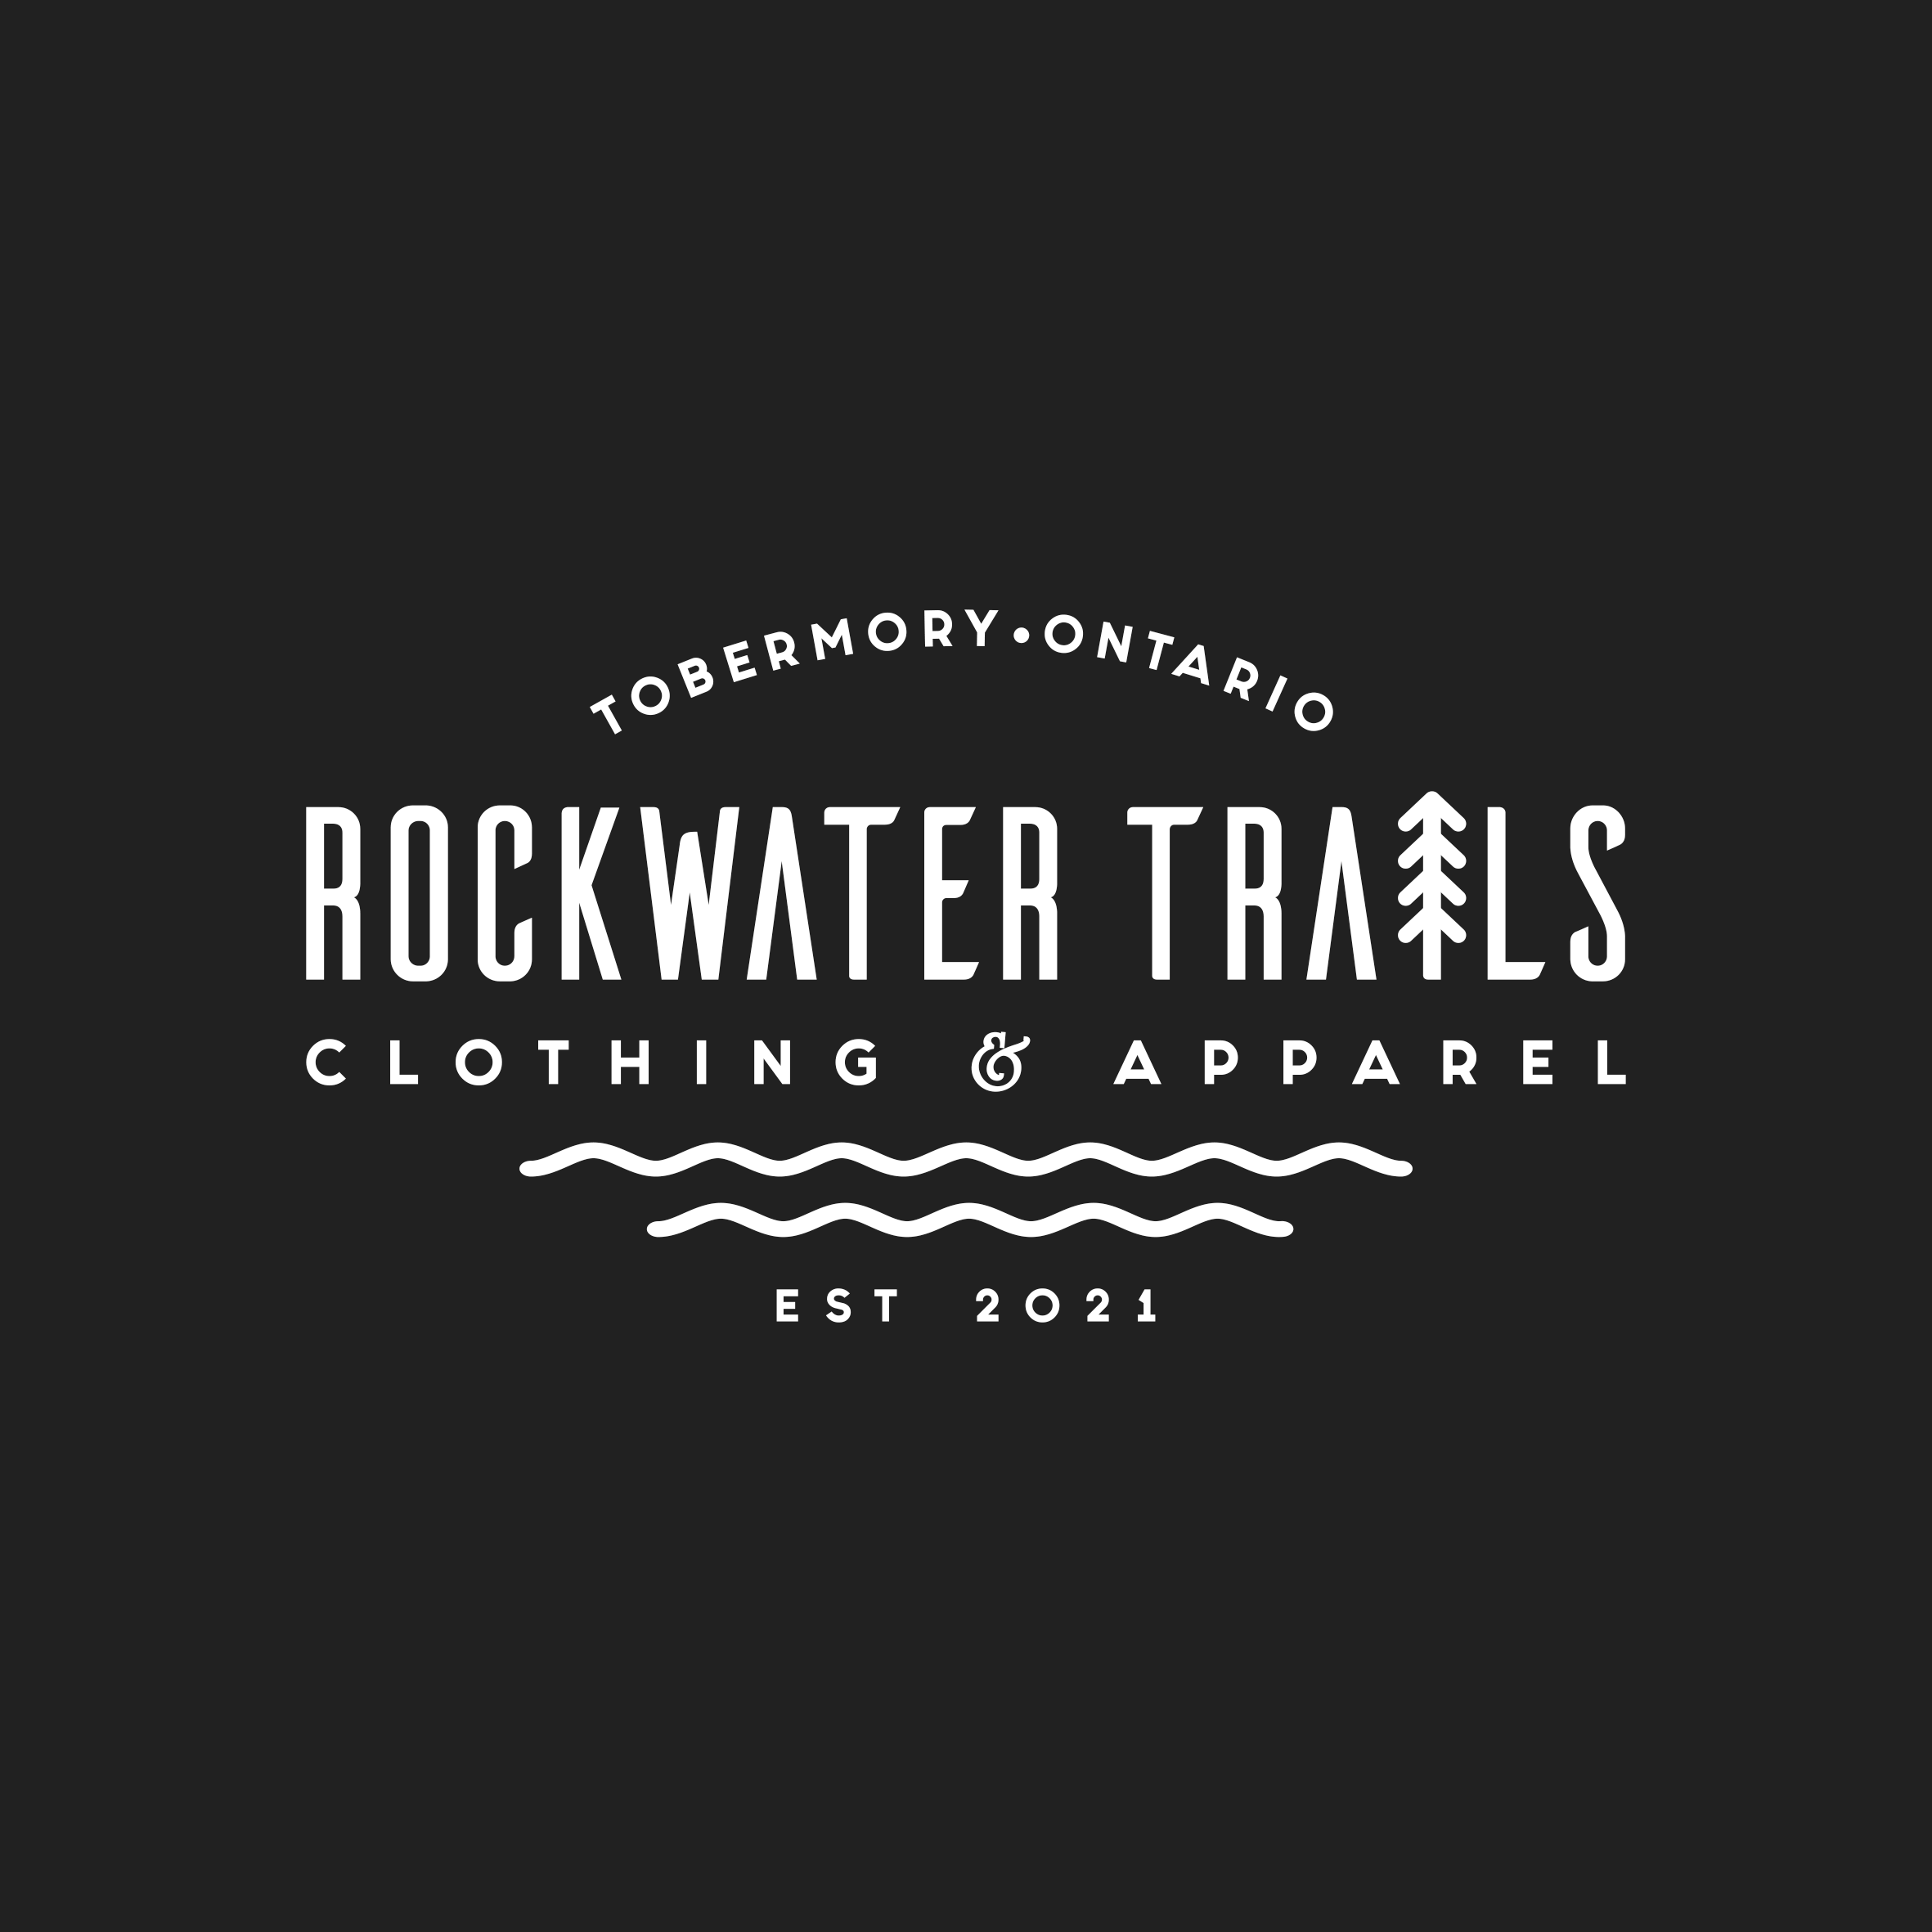 Rockwater Trails Clothing & Apparel